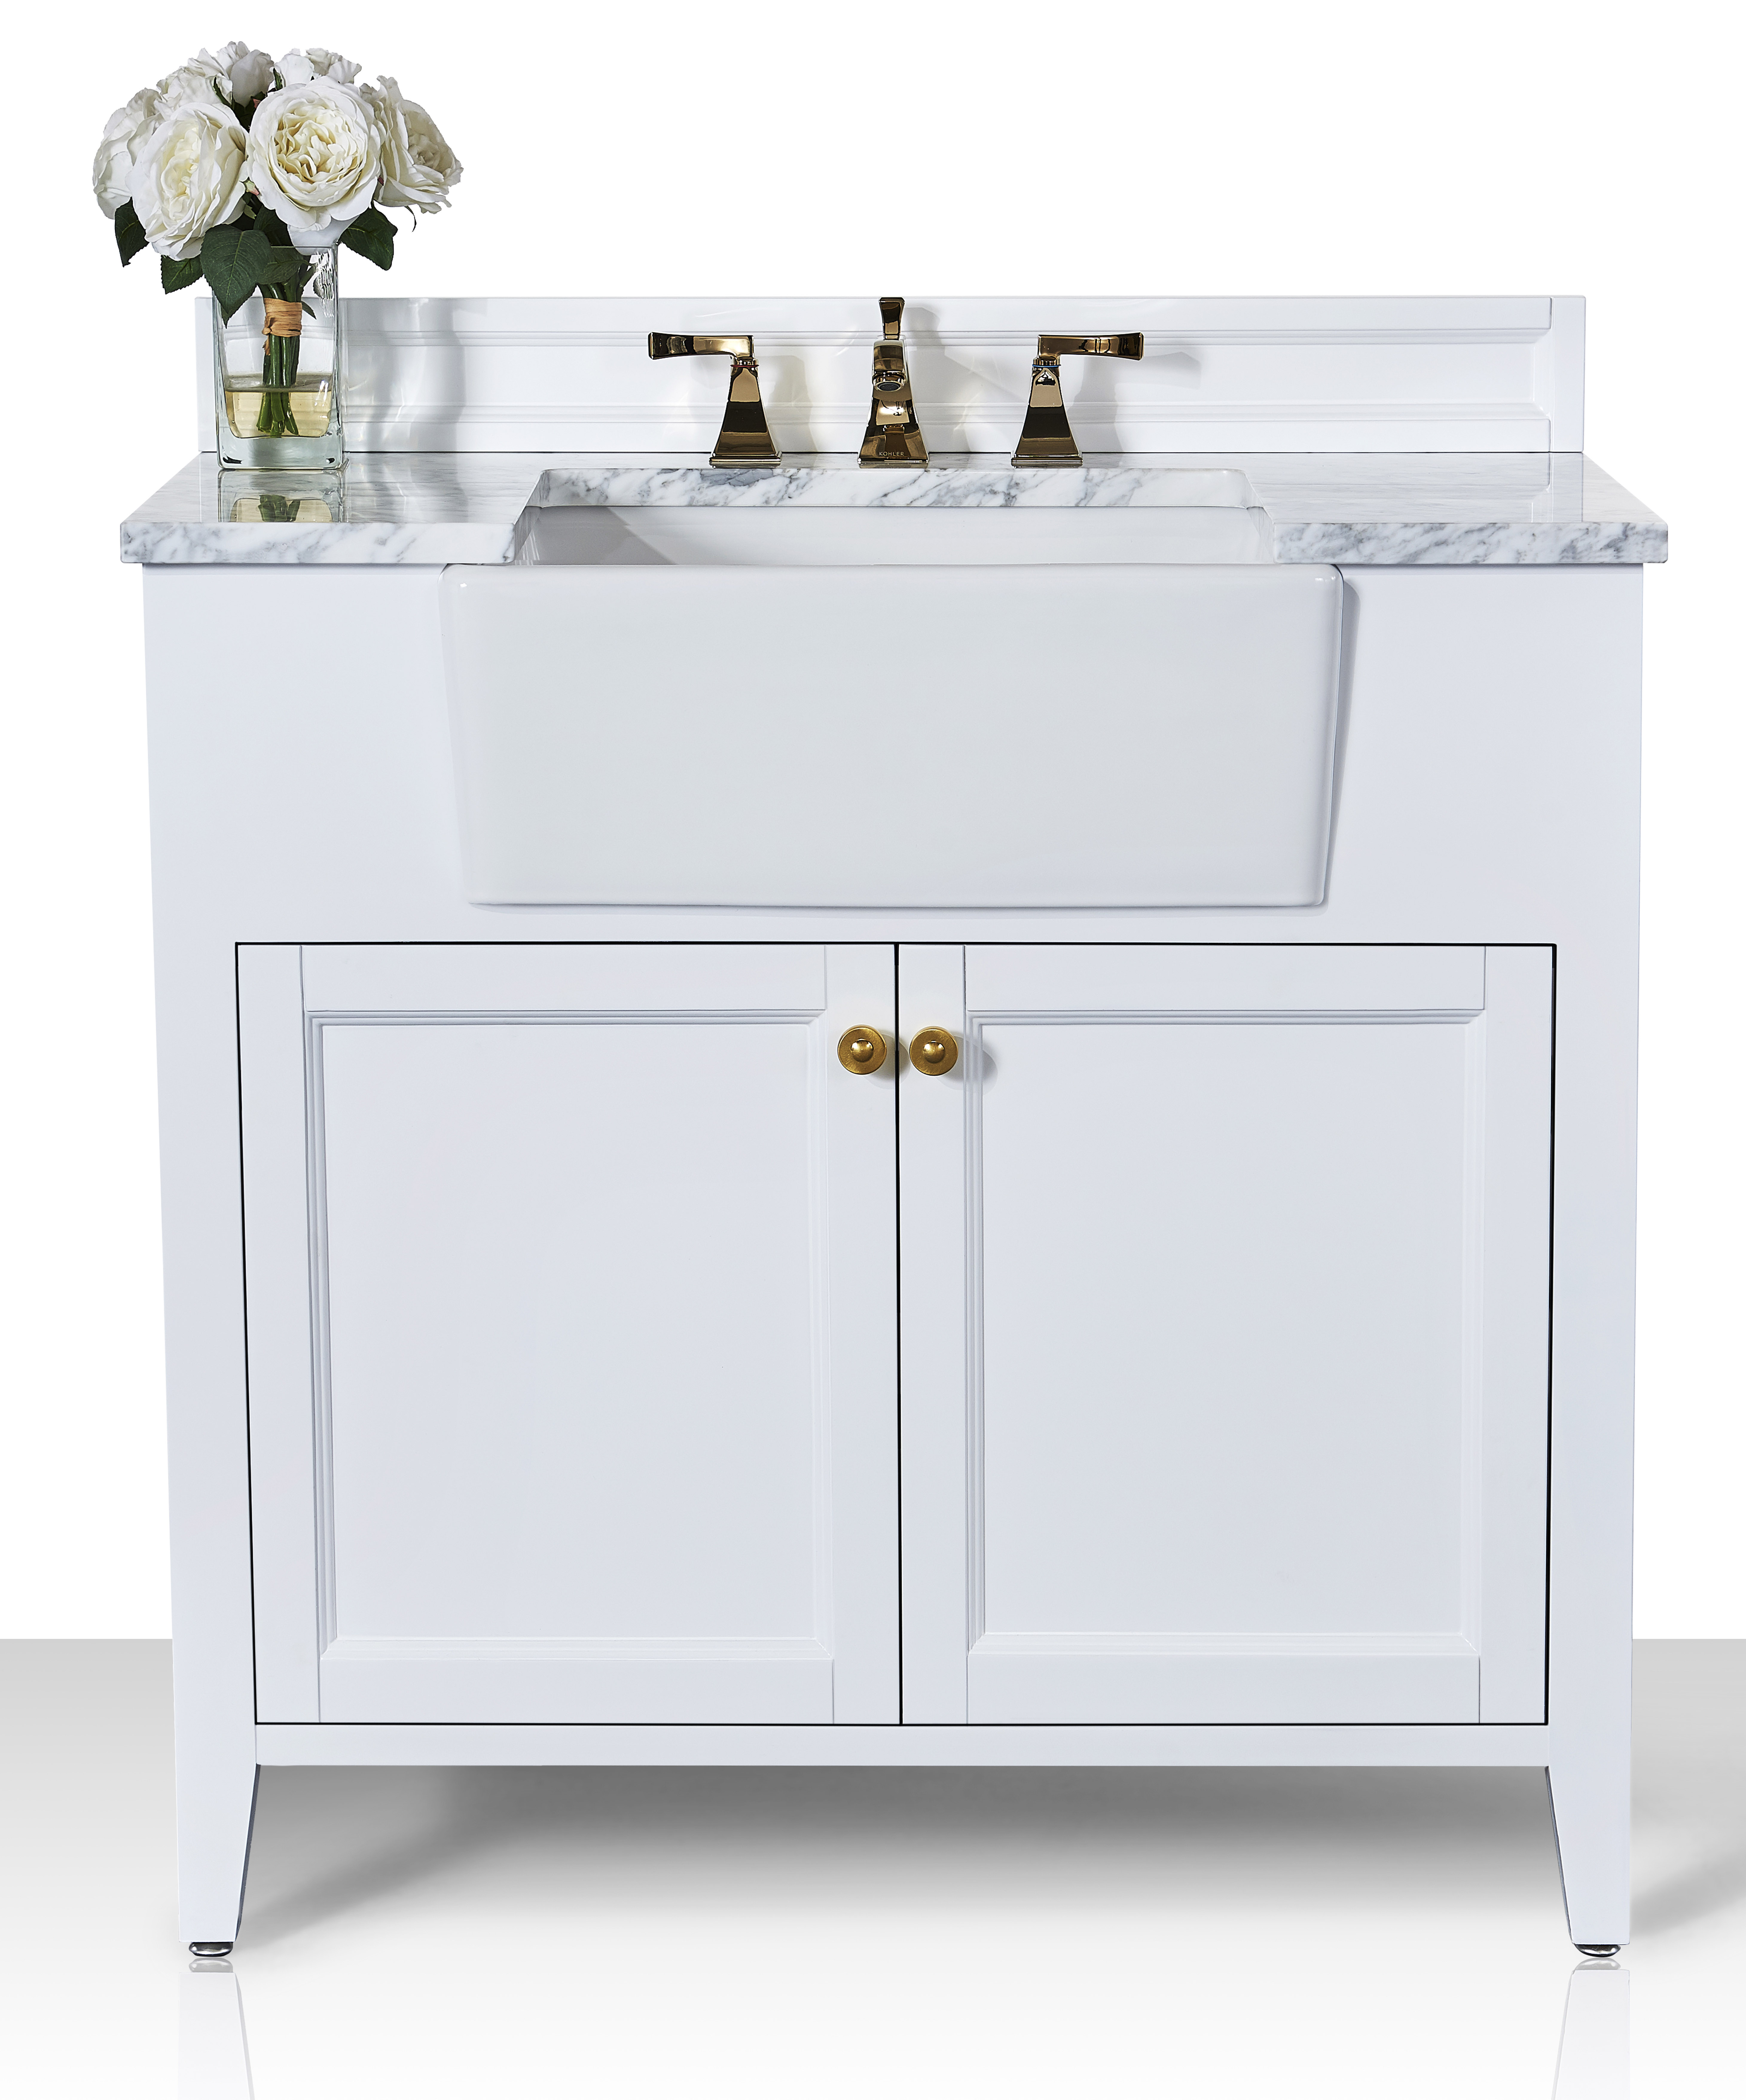 36" Bath Vanity Set in White with Italian Carrara White Marble Vanity Top and White Undermount Basin with Gold Hardware